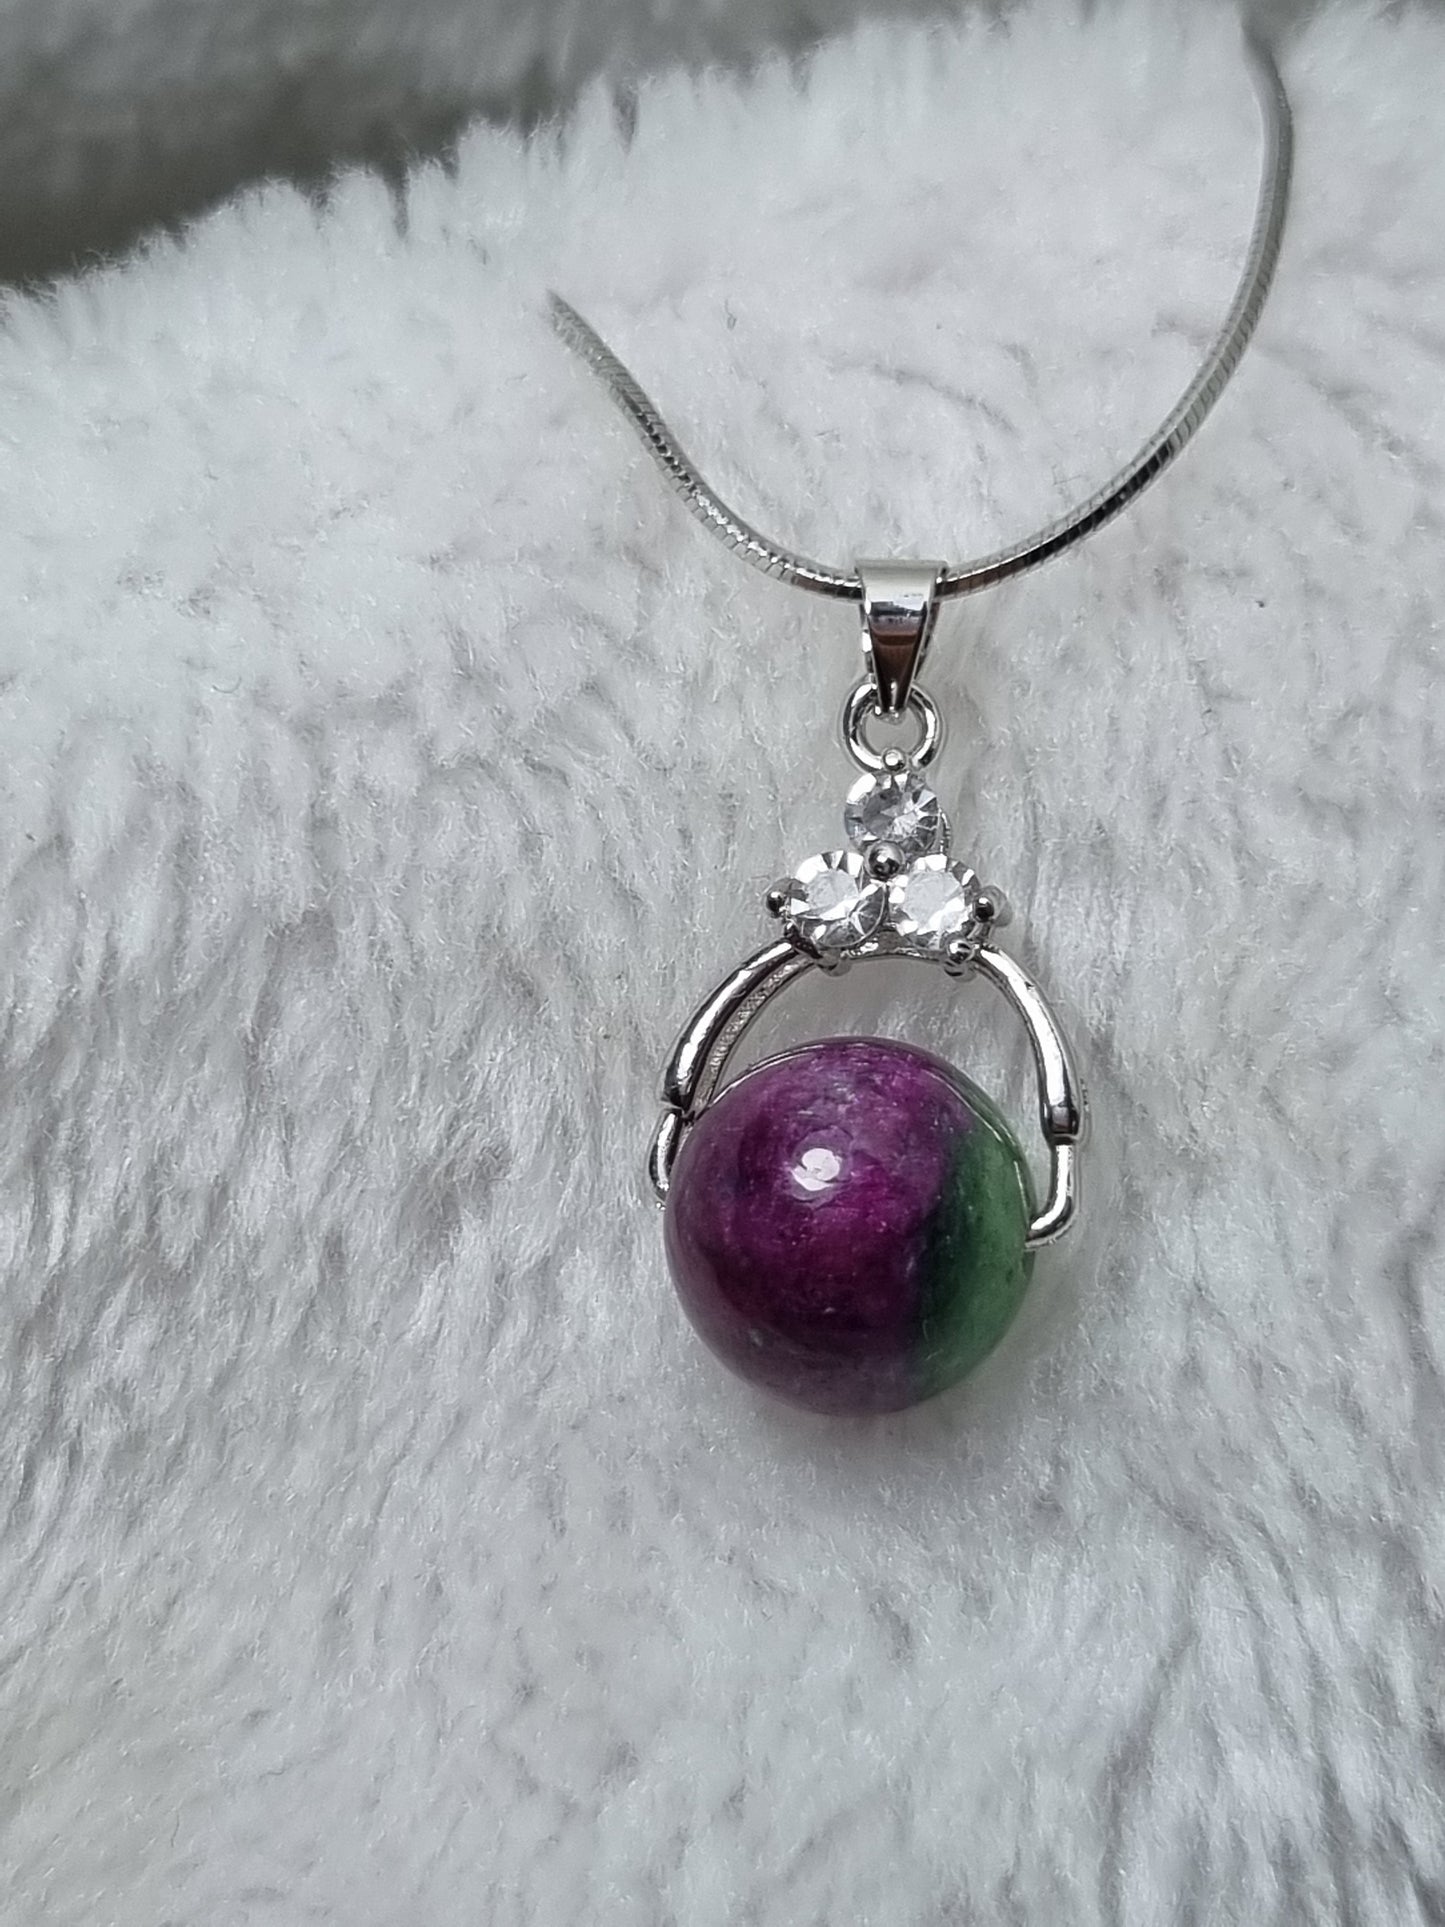 Ruby Zoisite Bead Necklace in Silver Setting